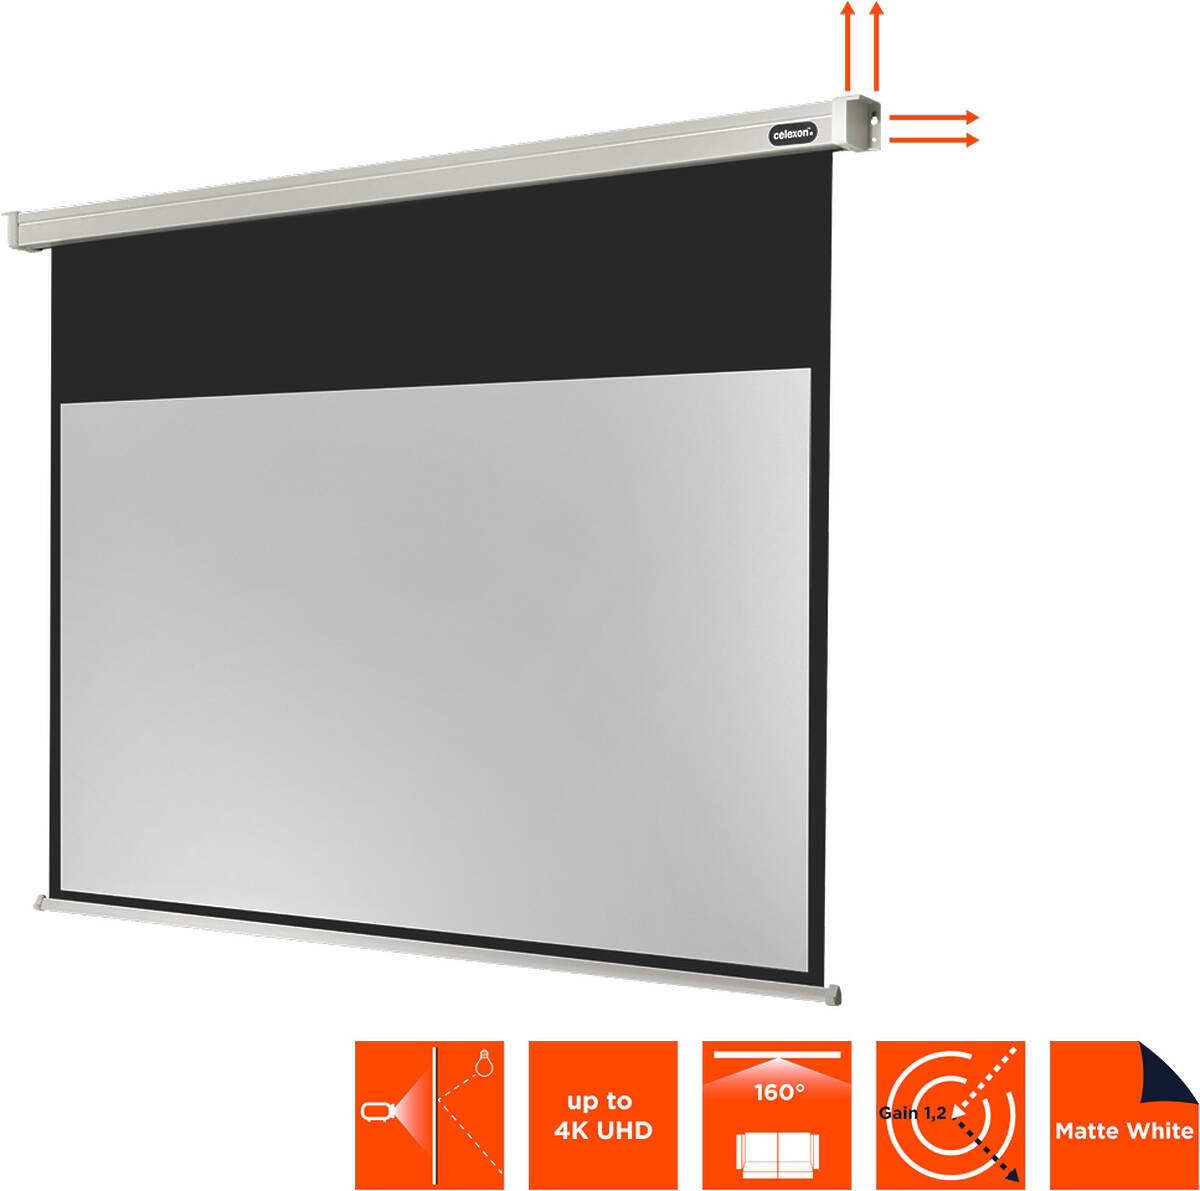 Celexon EP/154X87 70" (1.77m)
 16:9 aspect ratio projection screen product image. Click to enlarge.